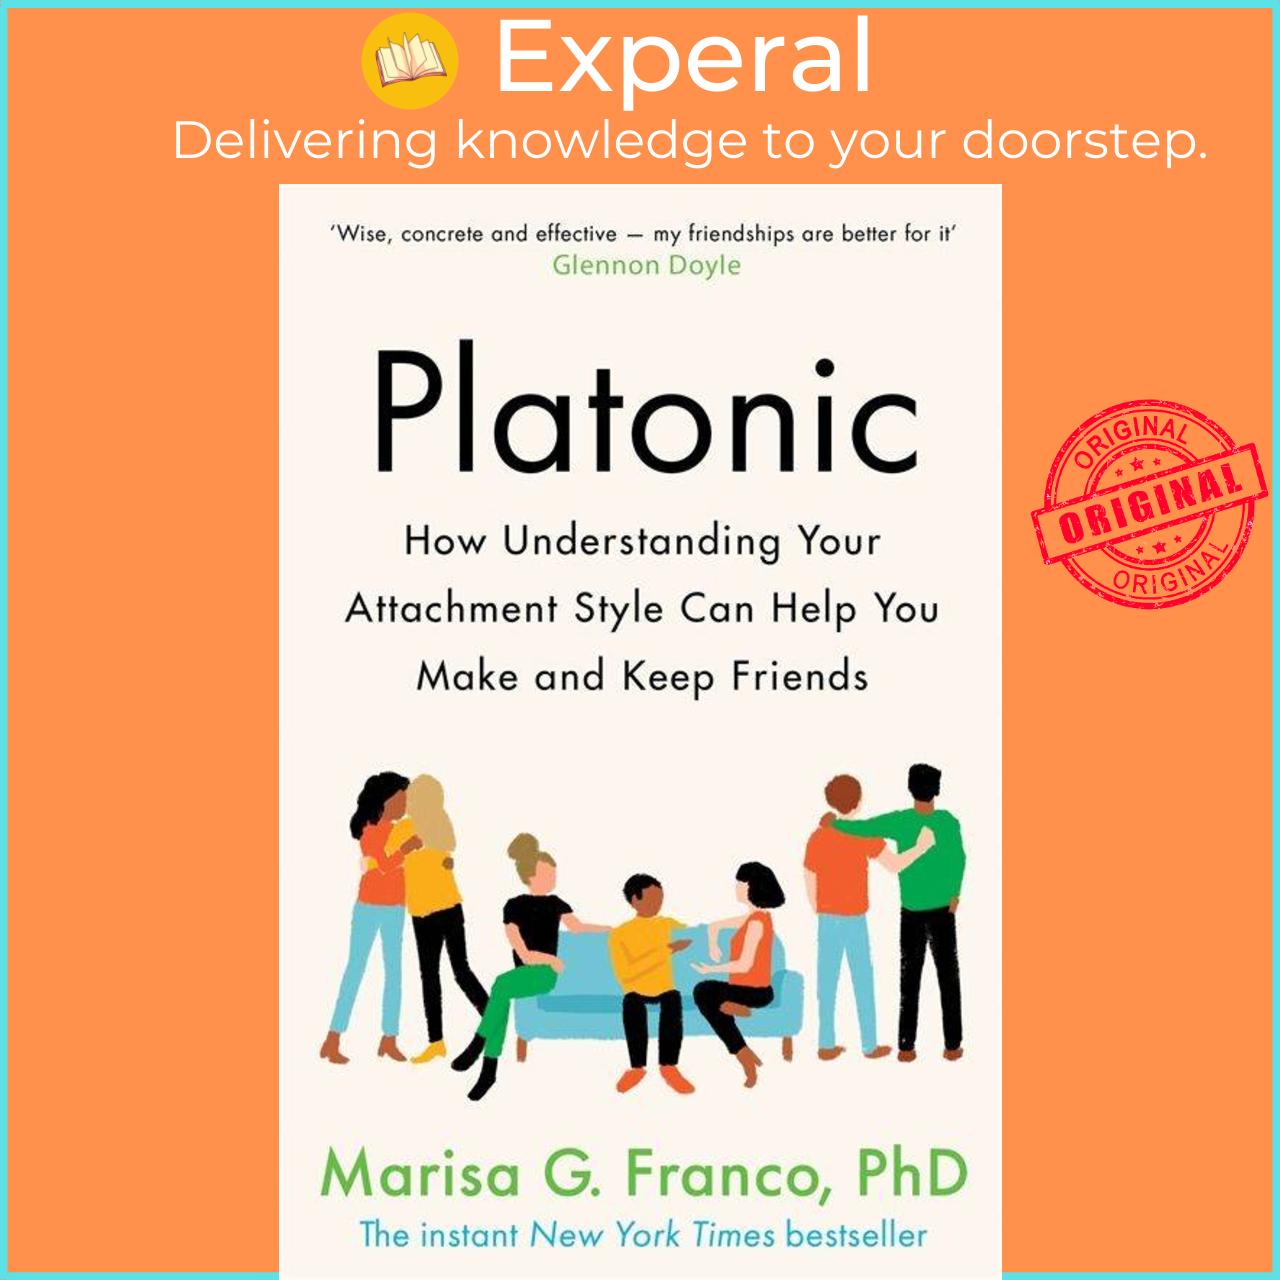 Sách - Platonic - How Understanding Your Attachment Style Can Help You  by Marisa G. Franco, PhD (UK edition, paperback)